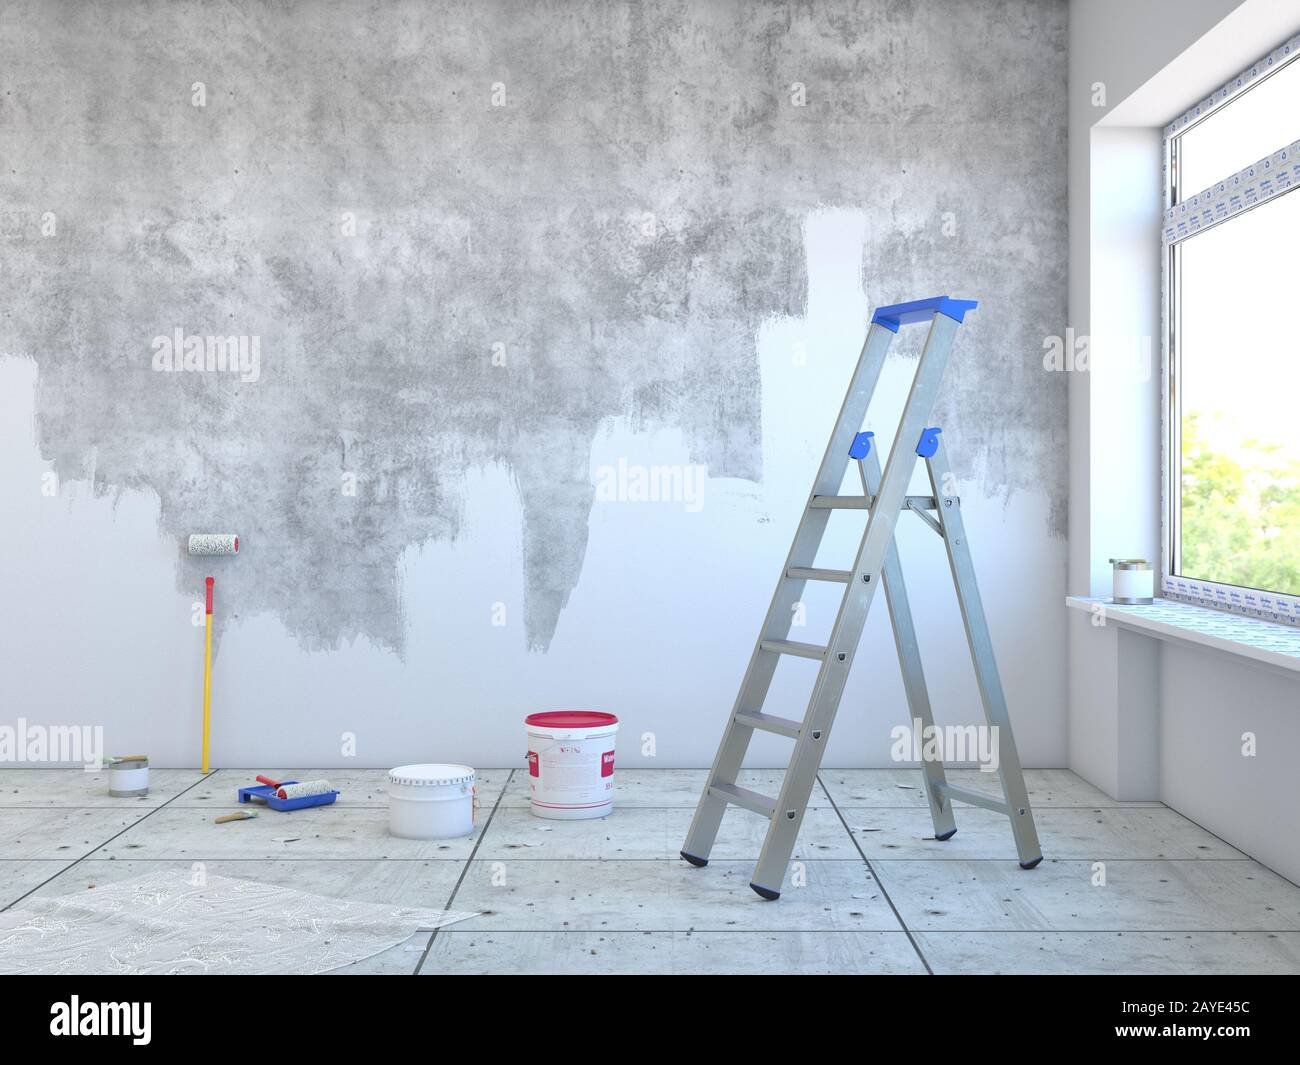 3D rendering wall painting Stock Photo